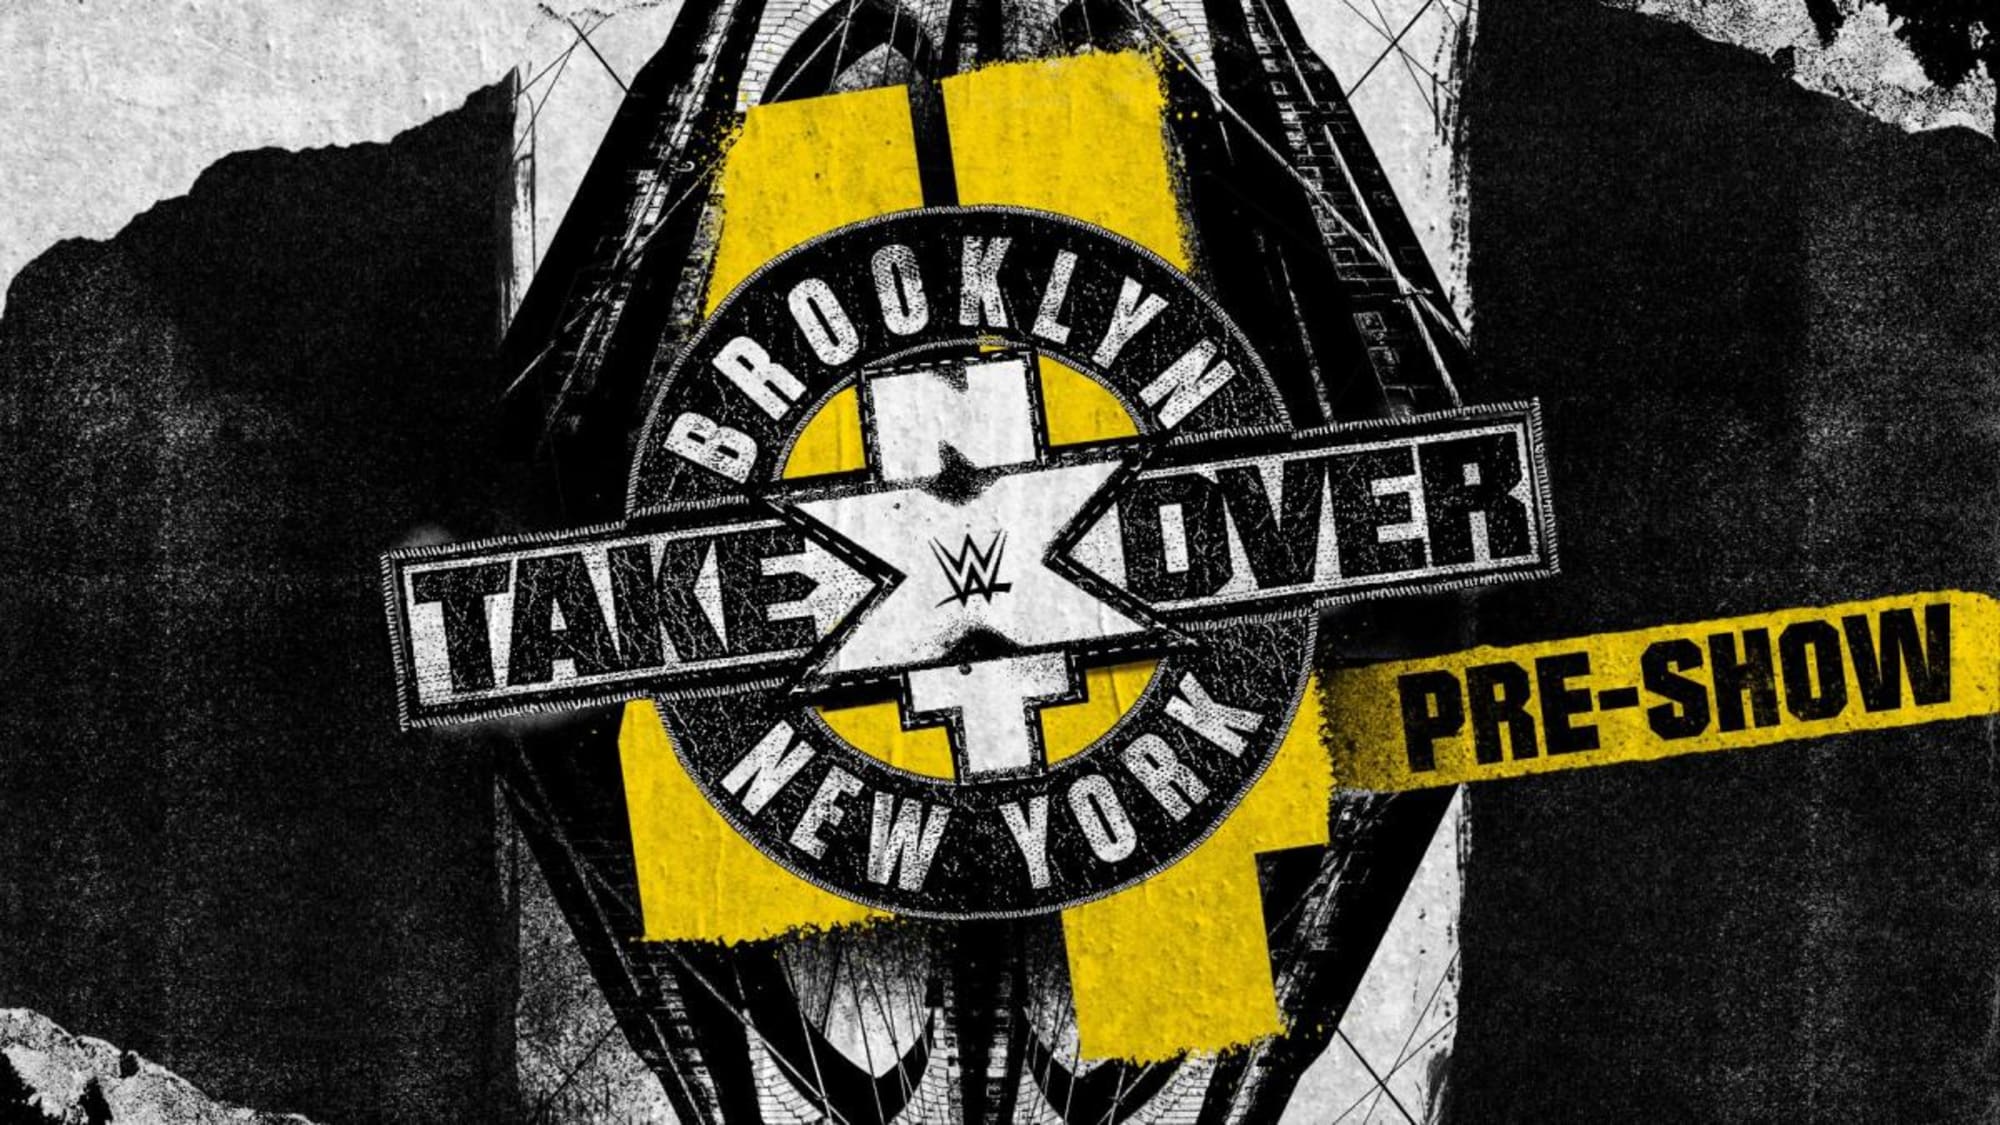 nxt takeover brooklyn